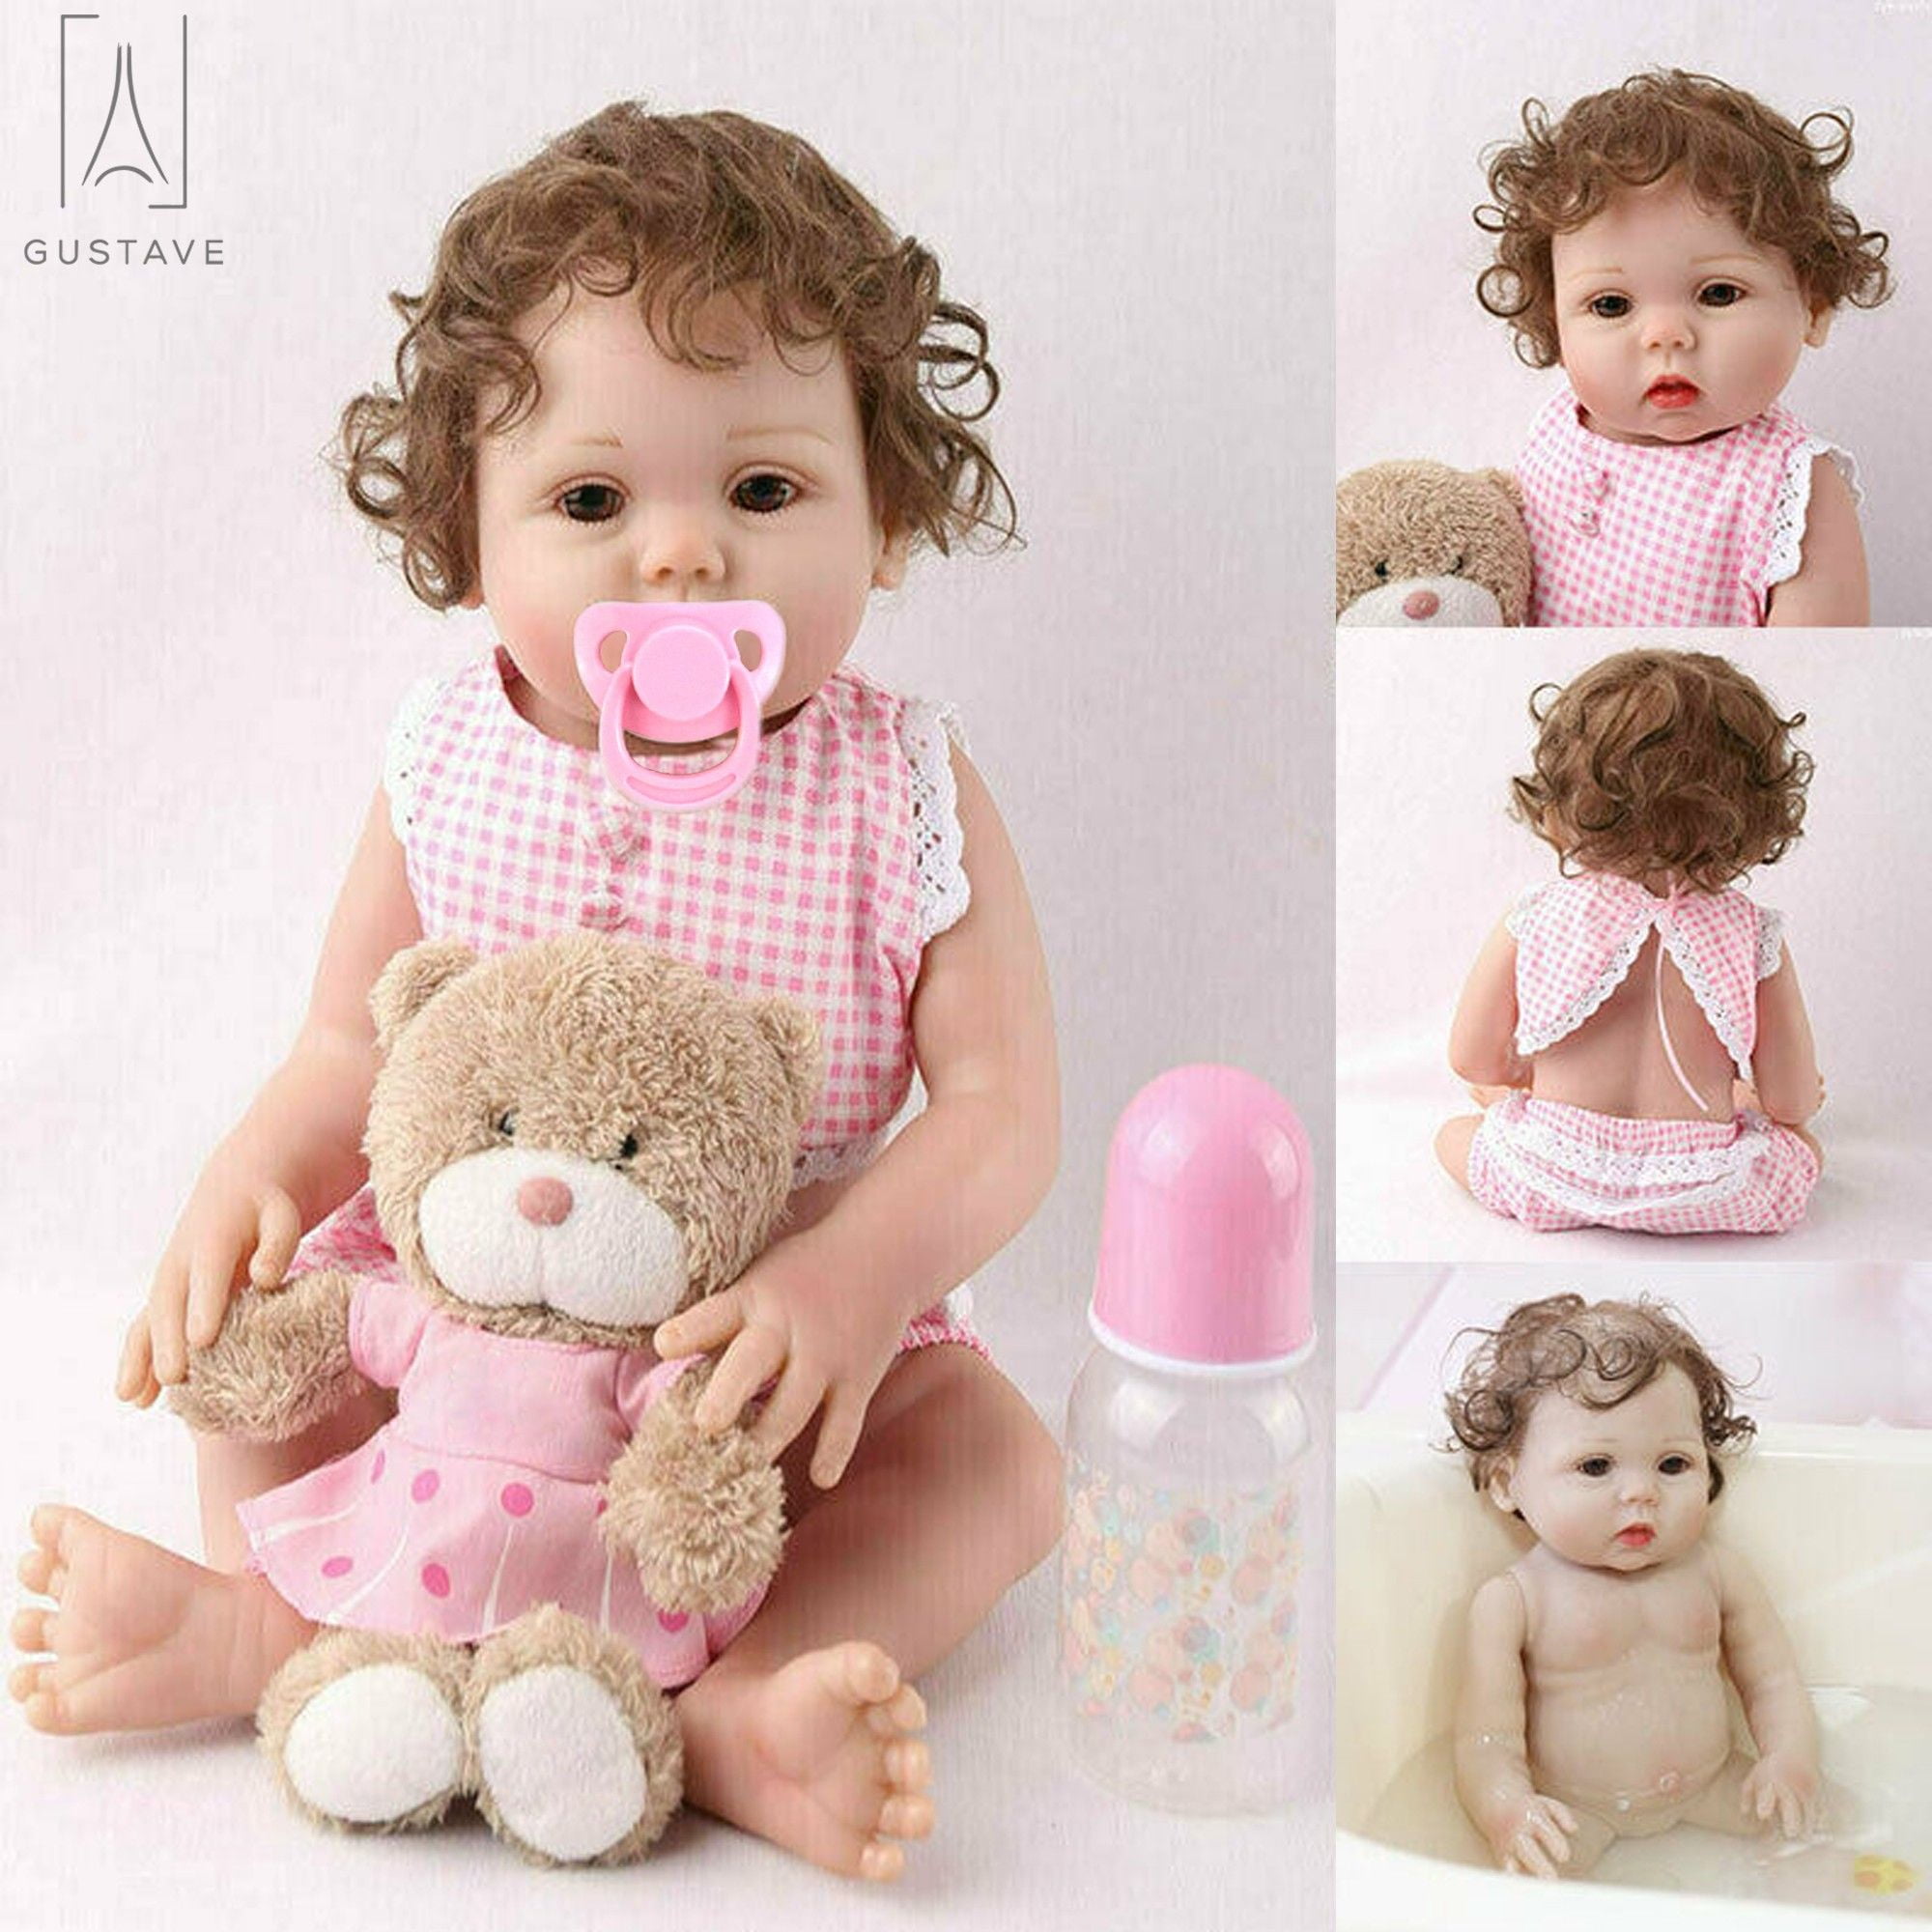 Reborn Baby Doll Girl 22" Full Vinyl Silicone Anatomically Correct Curly Hair 